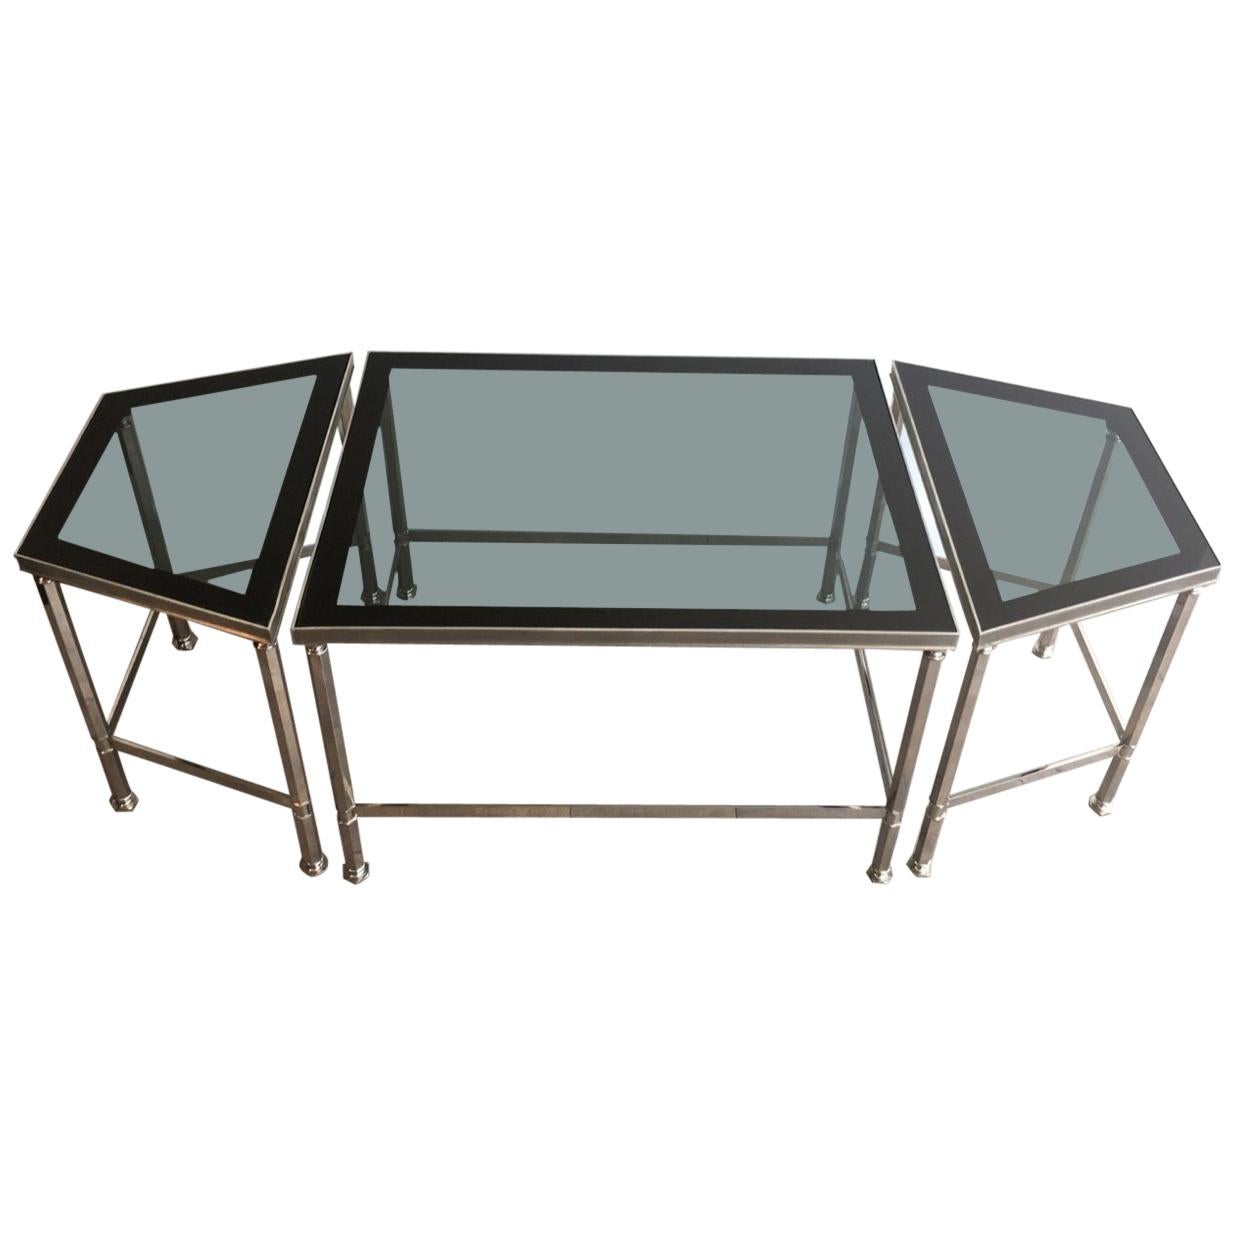 Rare Nickeled Tripartite Coffee Table with Glass Tops Lacquered All Around For Sale